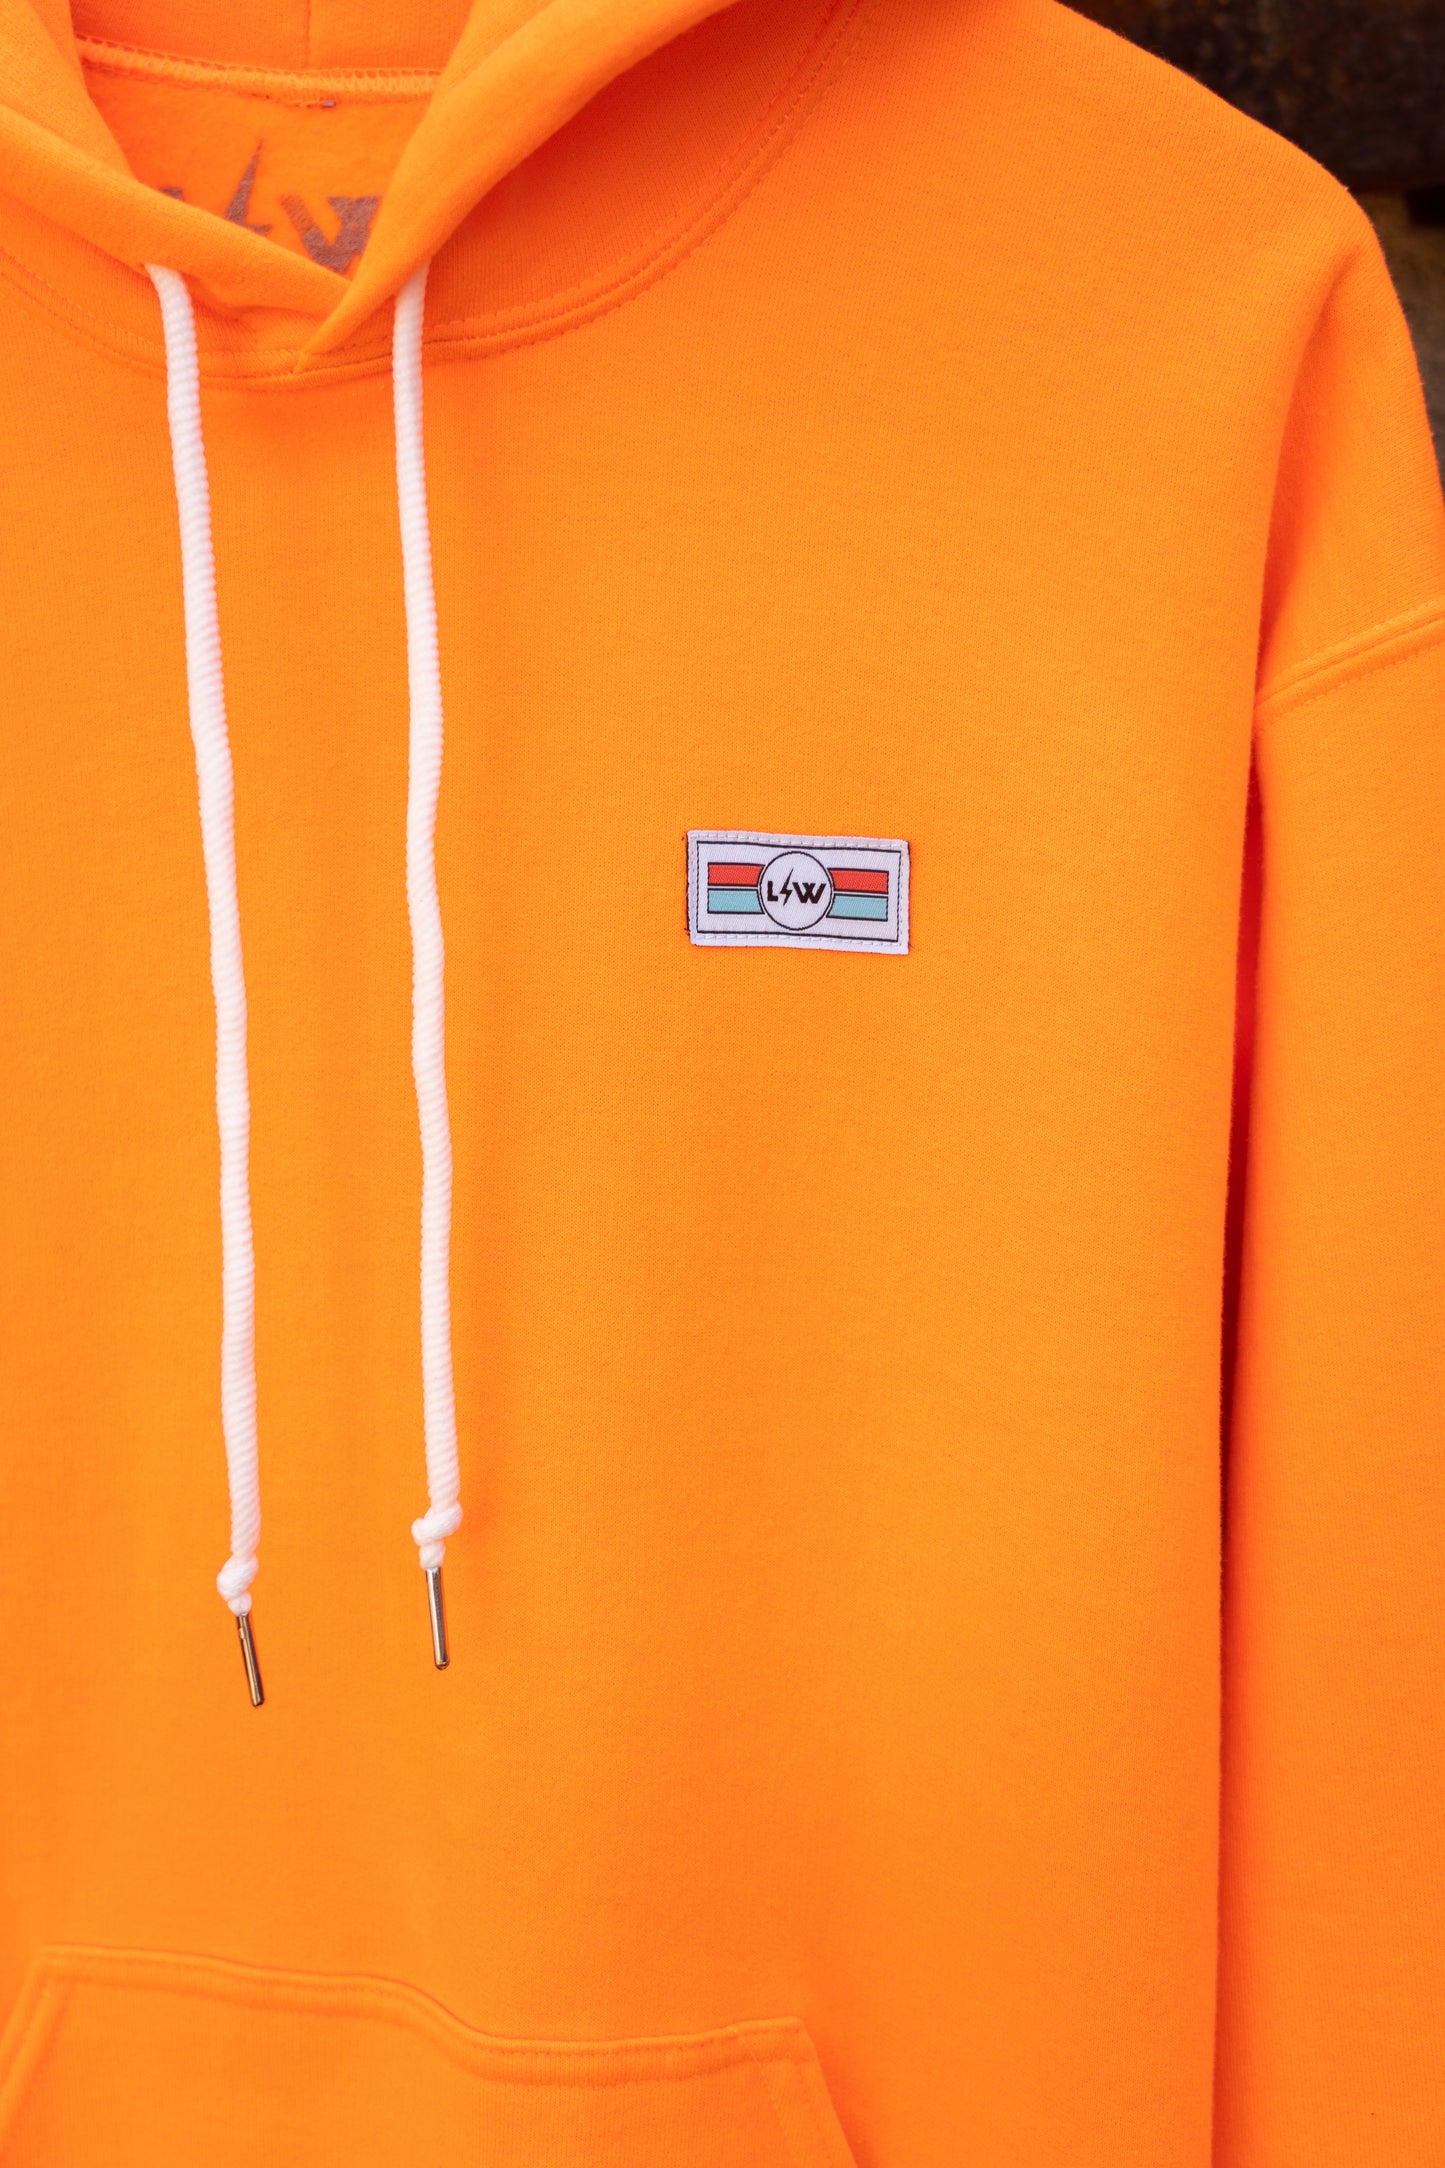 SAFETY MEETING PULLOVER